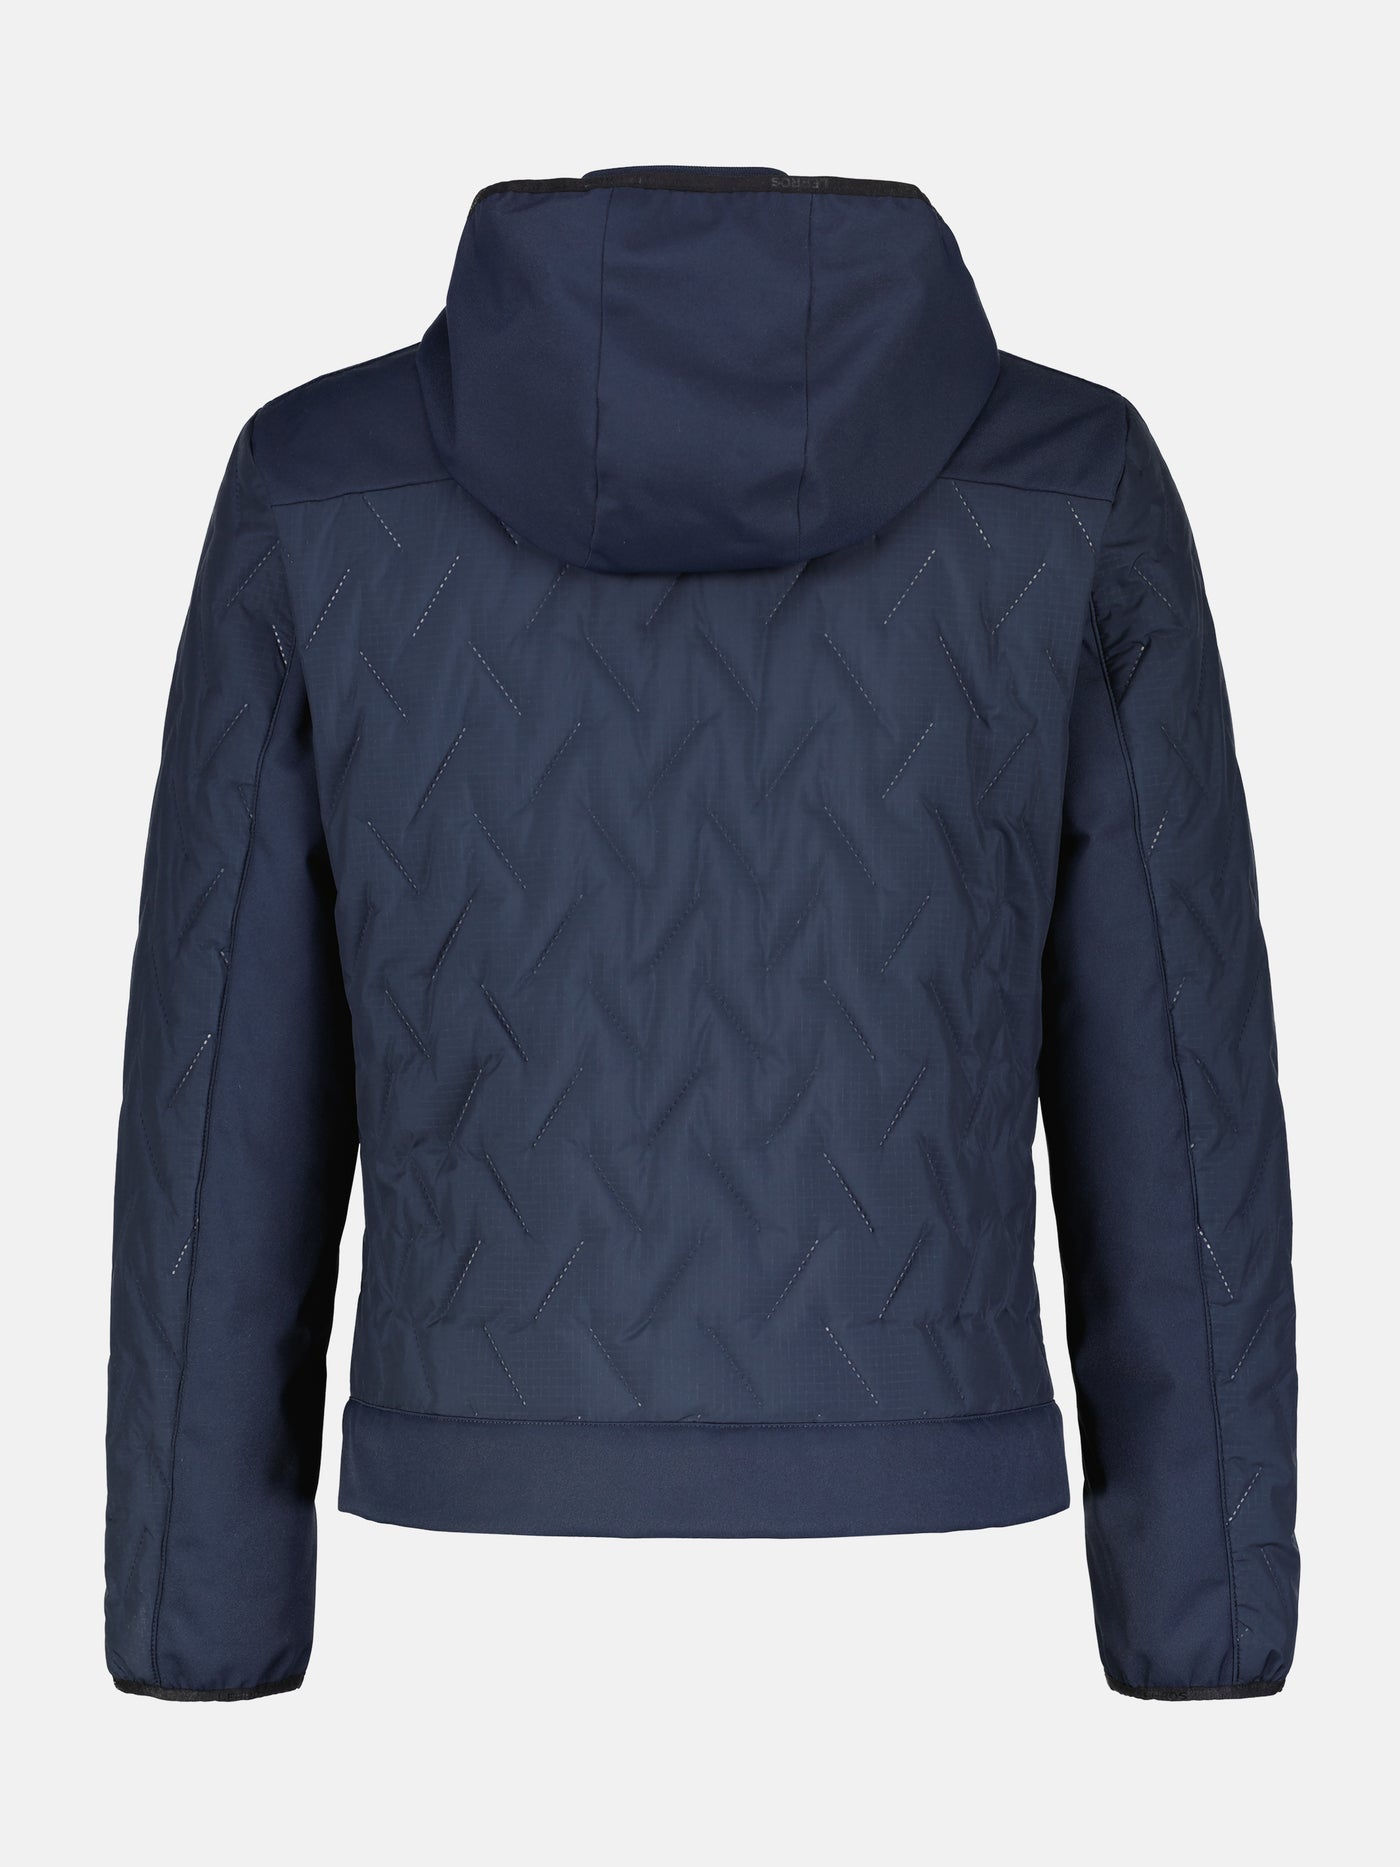 Men's quilted jacket with hood